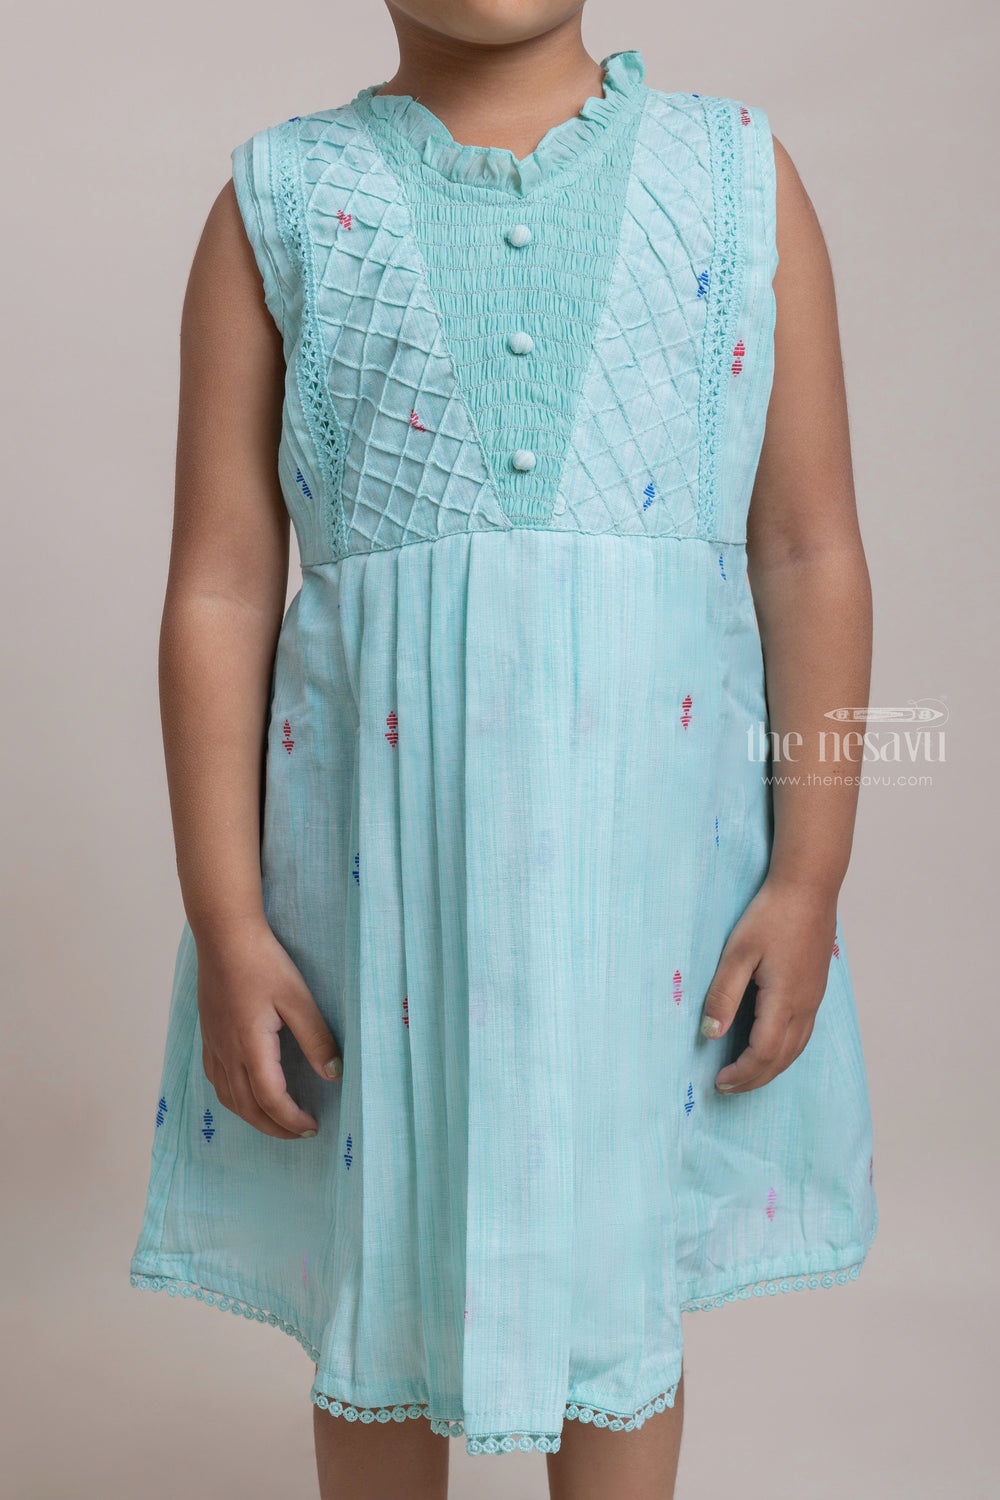 The Nesavu Girls Cotton Frock Charming Sea Green Sleeveless Pleated Casual Cotton Frock For Girls Nesavu Fantastic Cotton Frocks For Girls | Latest Girls Frock Collection | The Nesavu